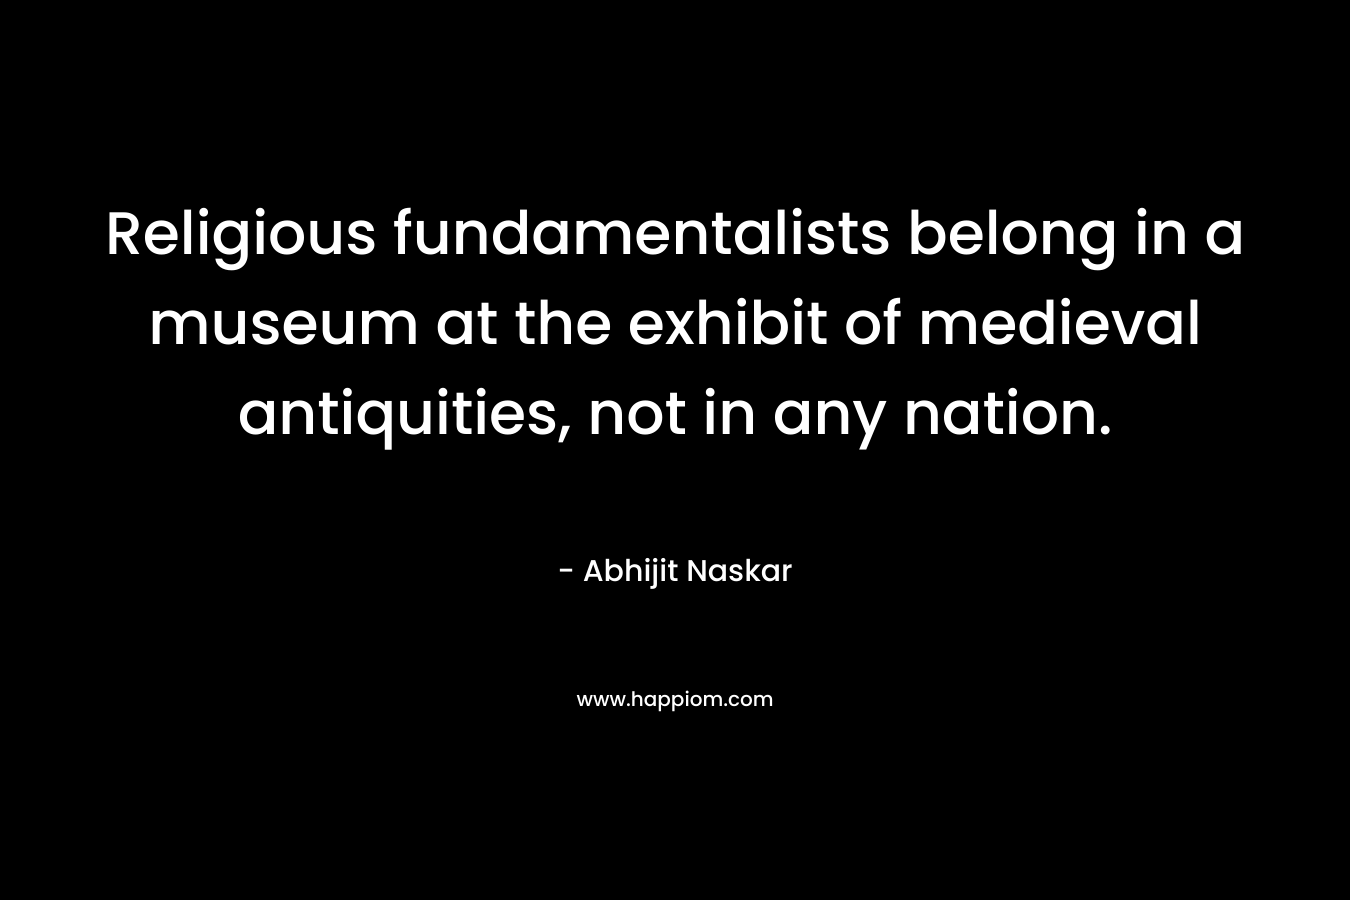 Religious fundamentalists belong in a museum at the exhibit of medieval antiquities, not in any nation. – Abhijit Naskar